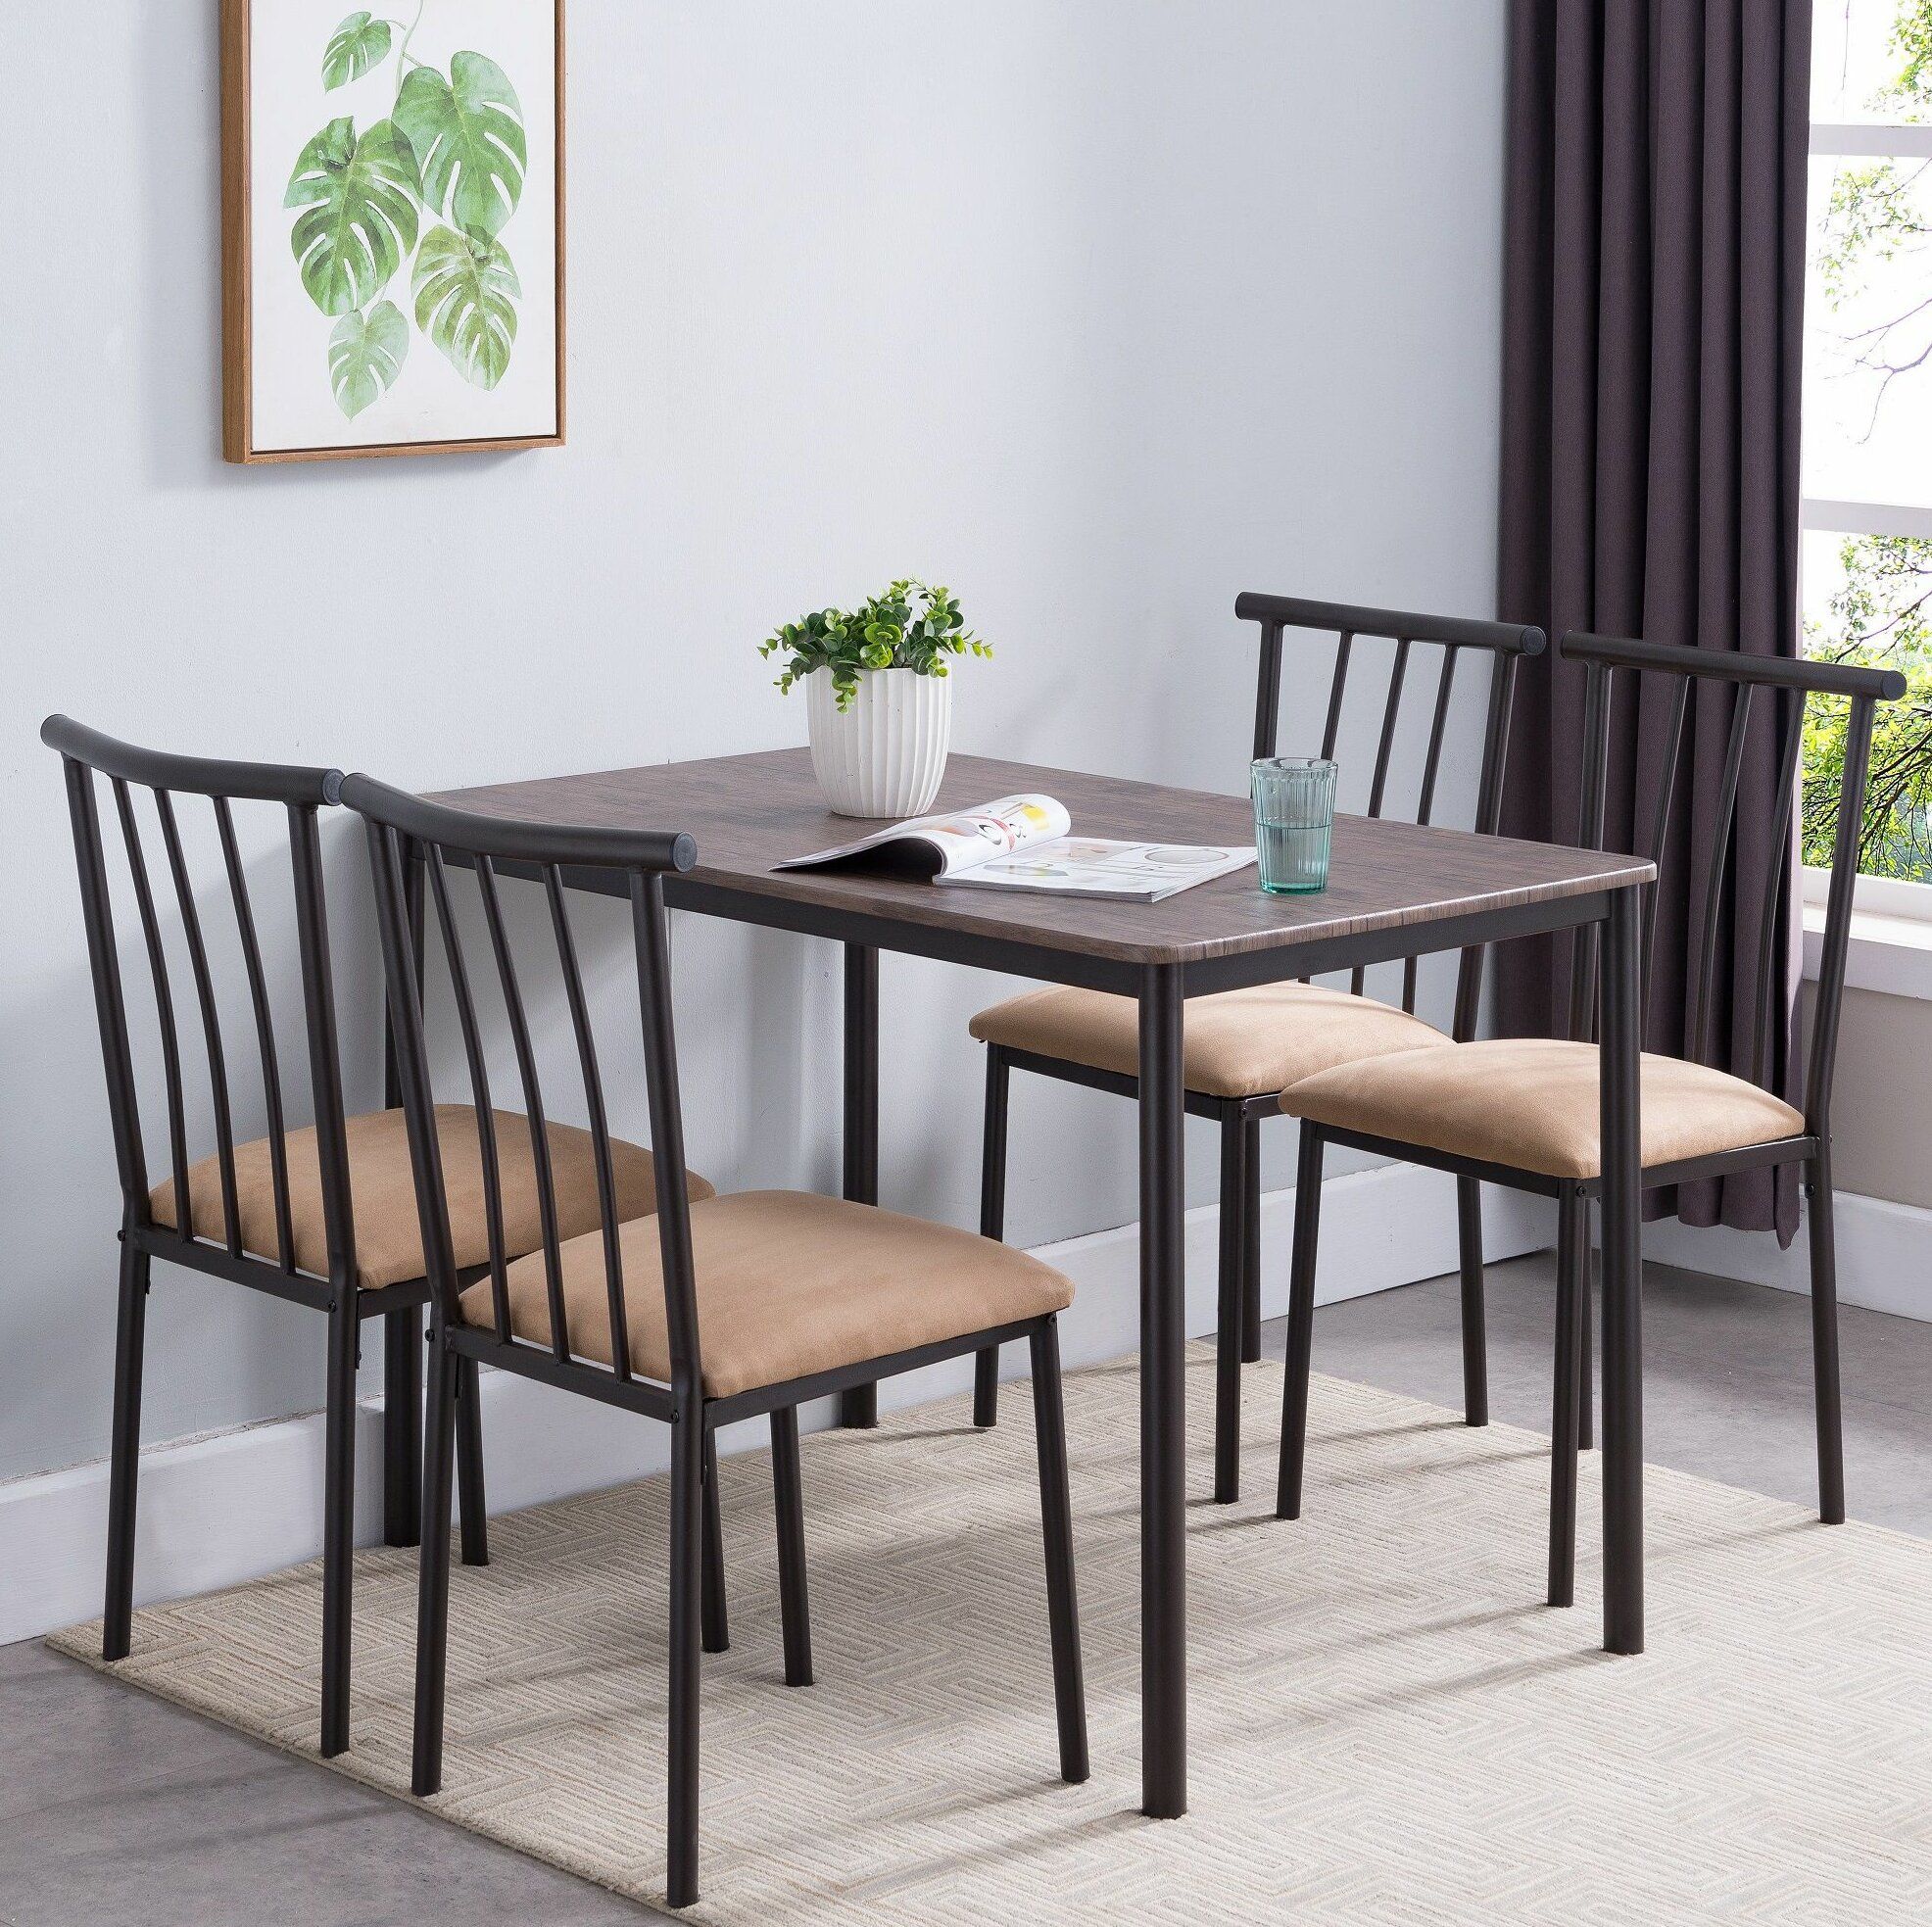 Stclair 5 Piece Dining Set Inside Latest Conover 5 Piece Dining Sets (View 14 of 20)